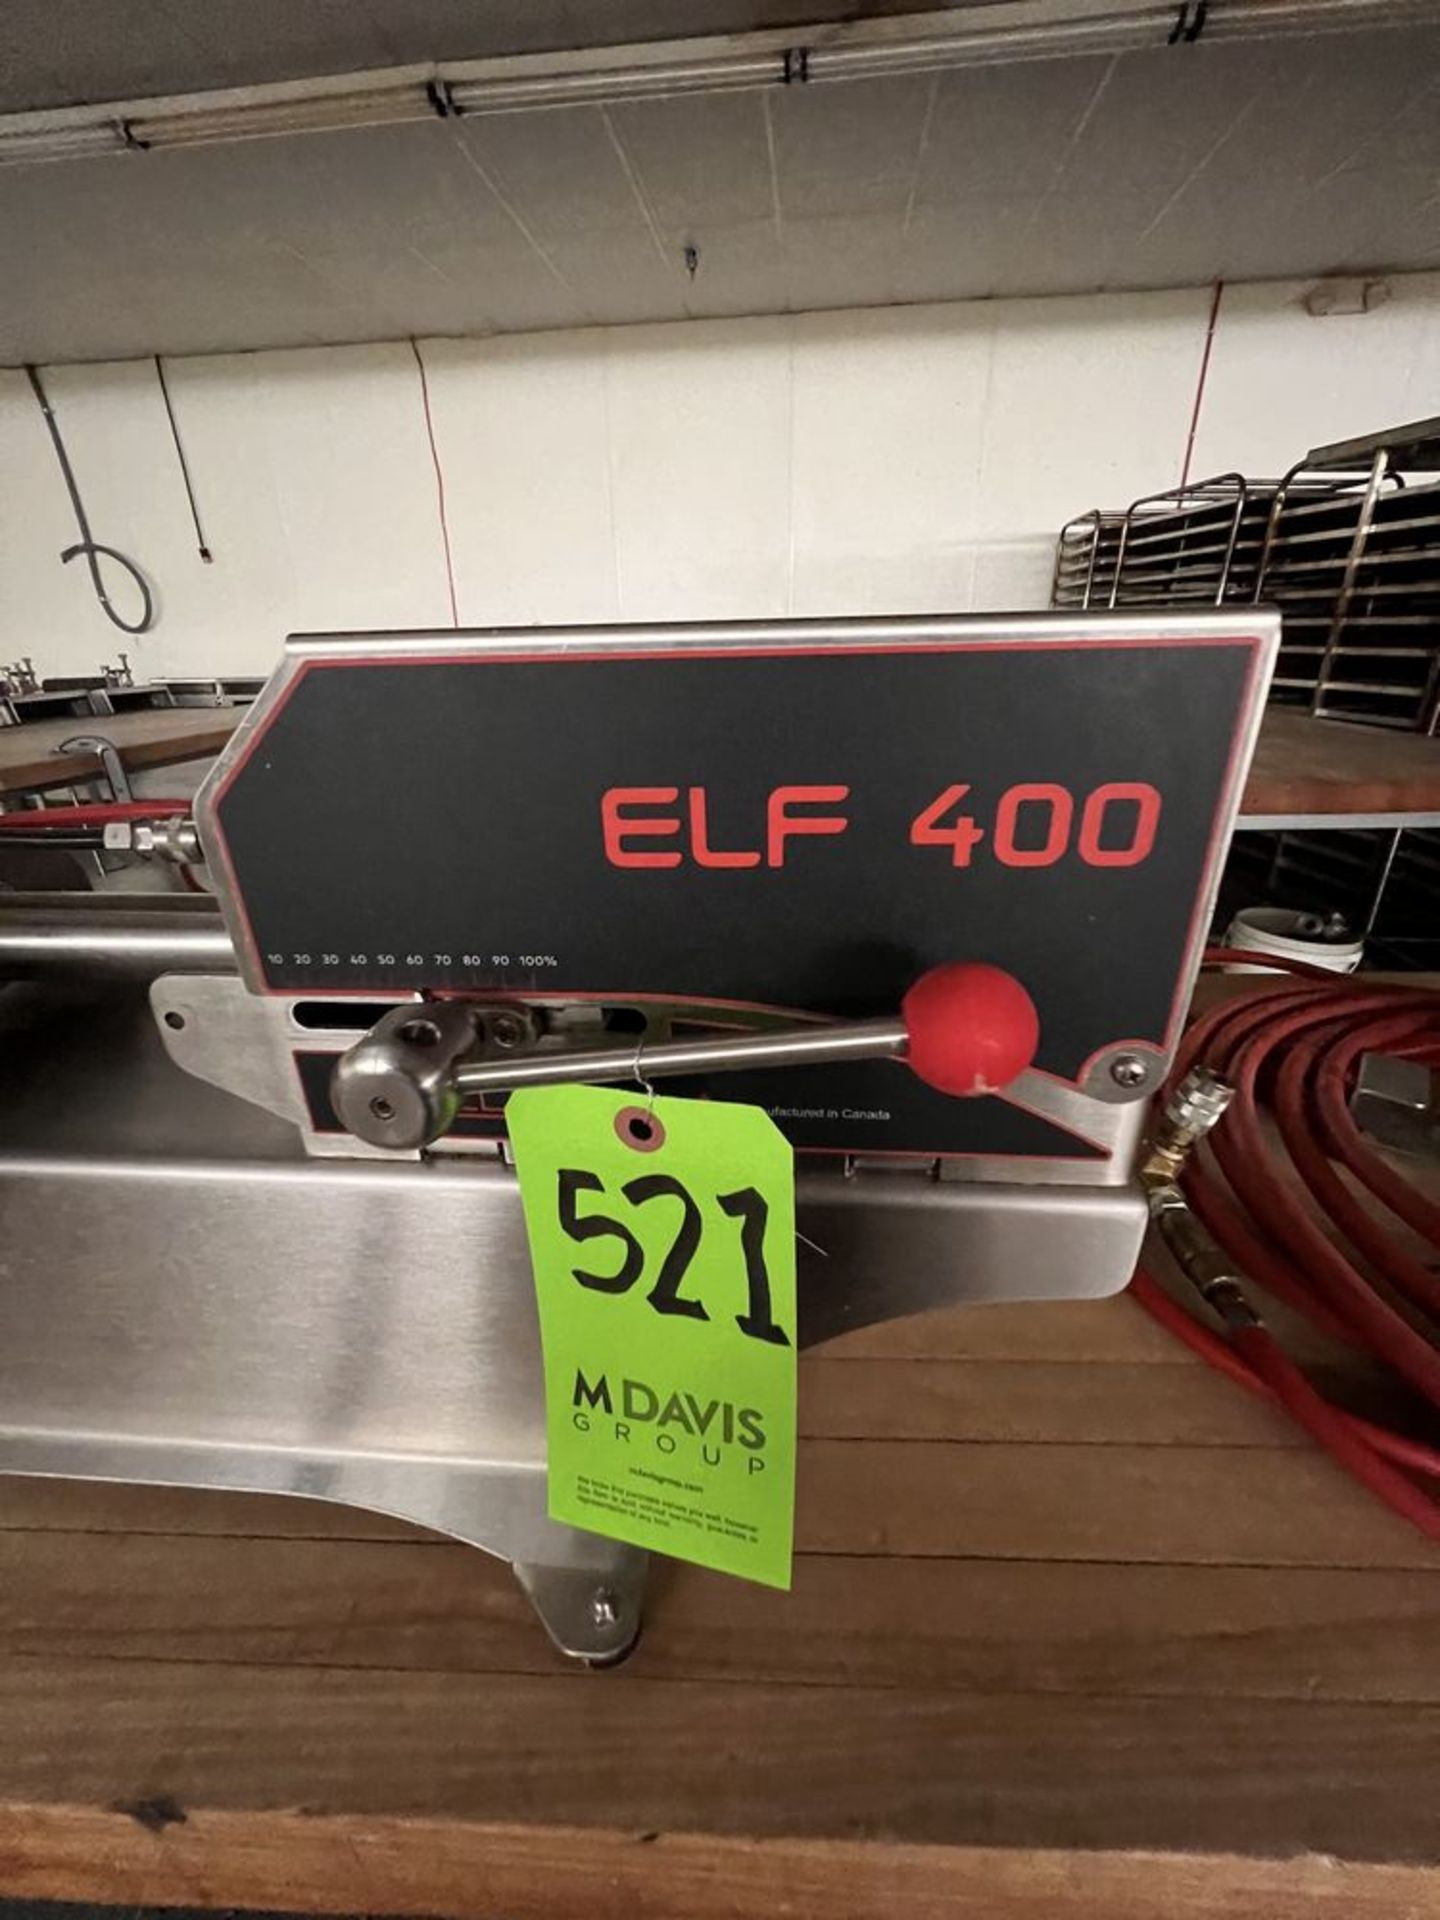 2018 UNIFILLER S/S TABLETOP DEPOSITOR, MODEL ELF 400, S/N ELFB-081342-003-01, WITH FOOT PEDAL - Image 2 of 10